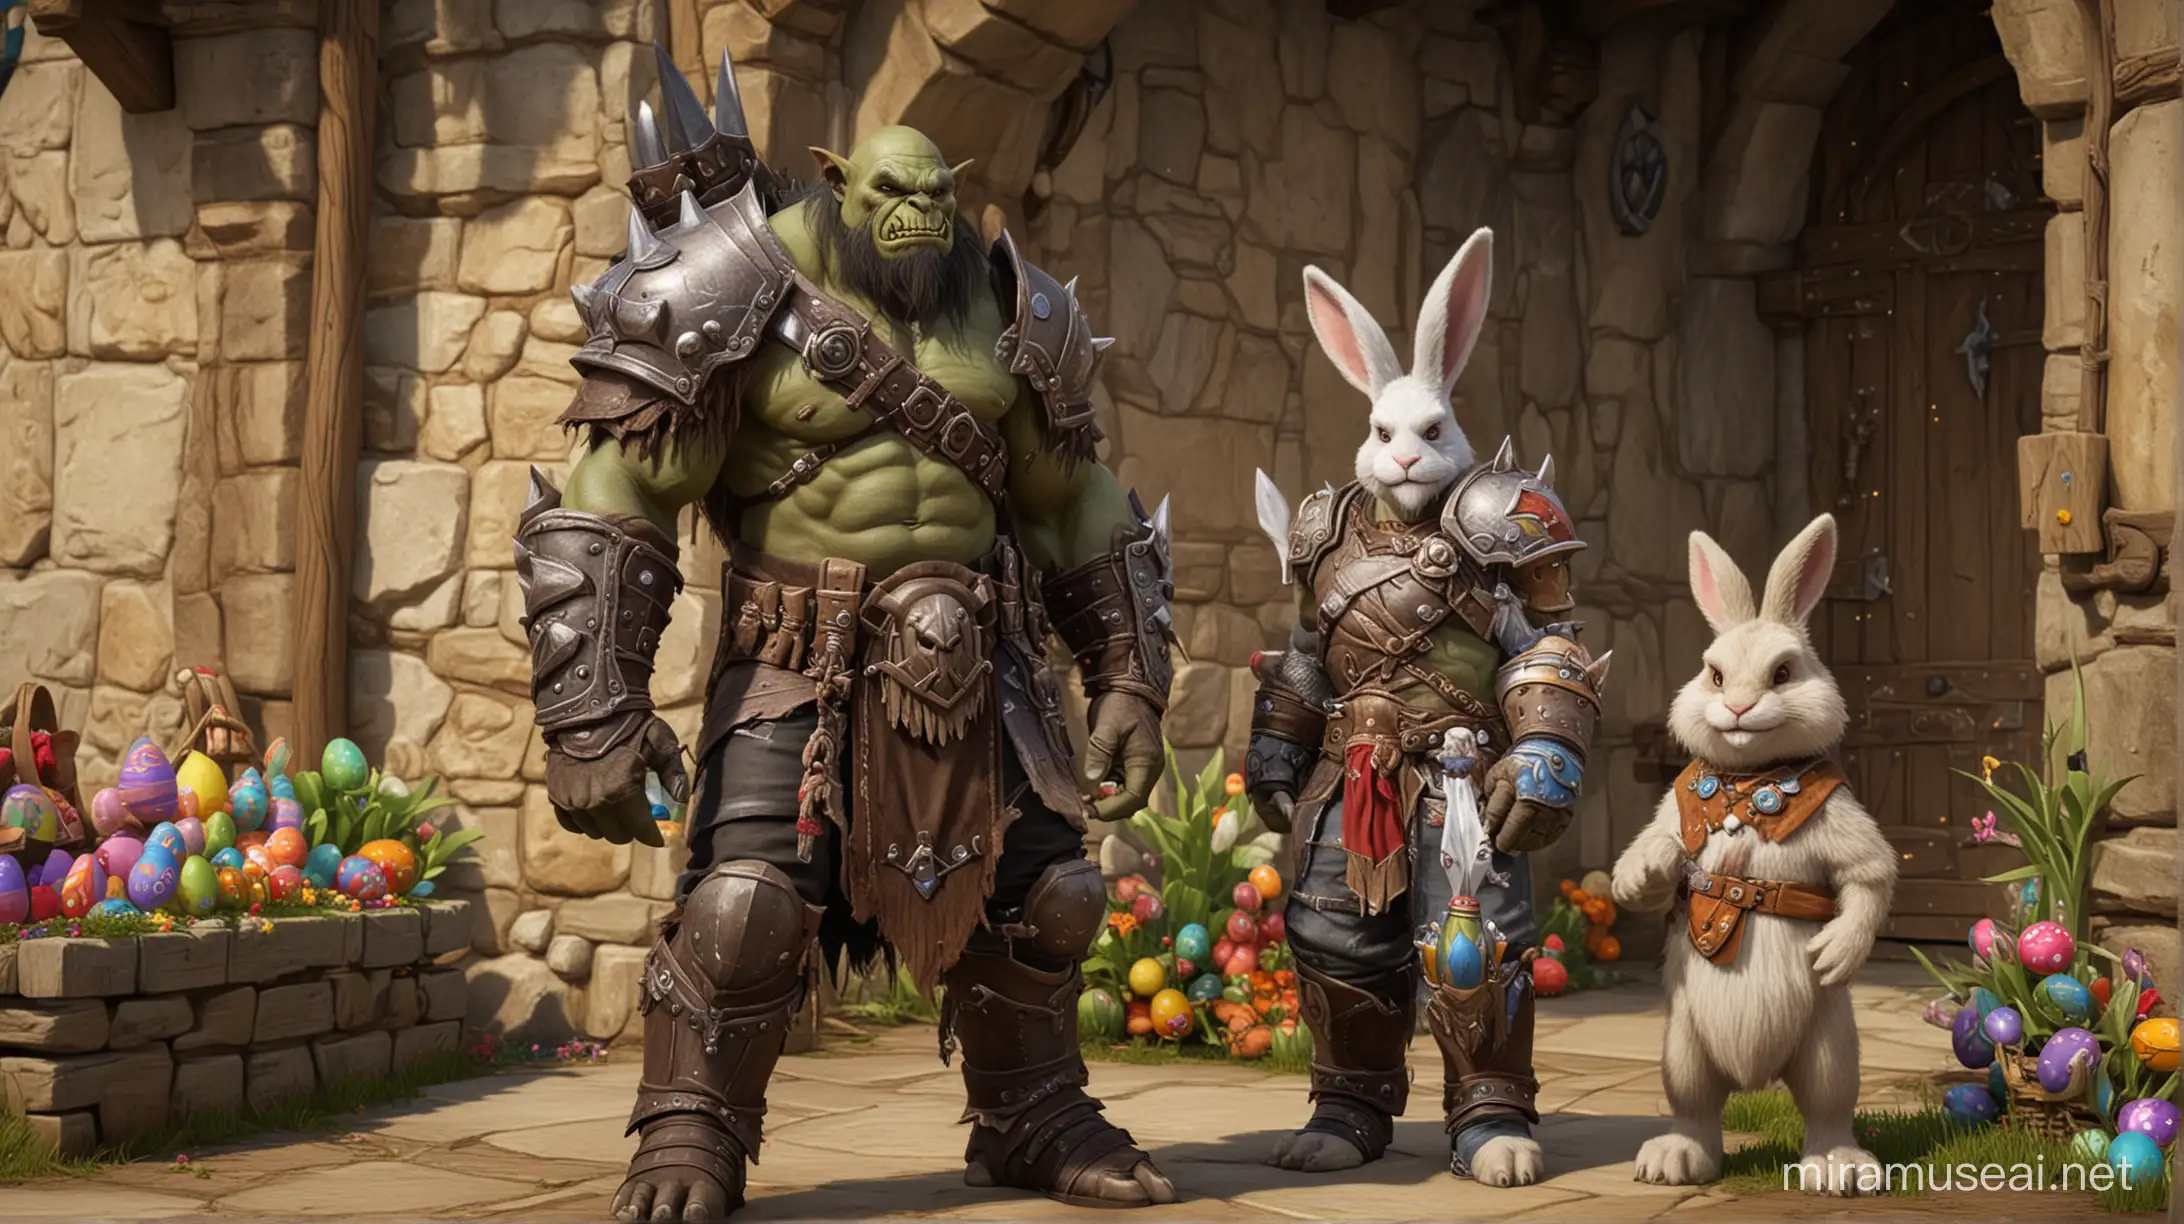 an orc from world of warcraft standing next to the easter bunny